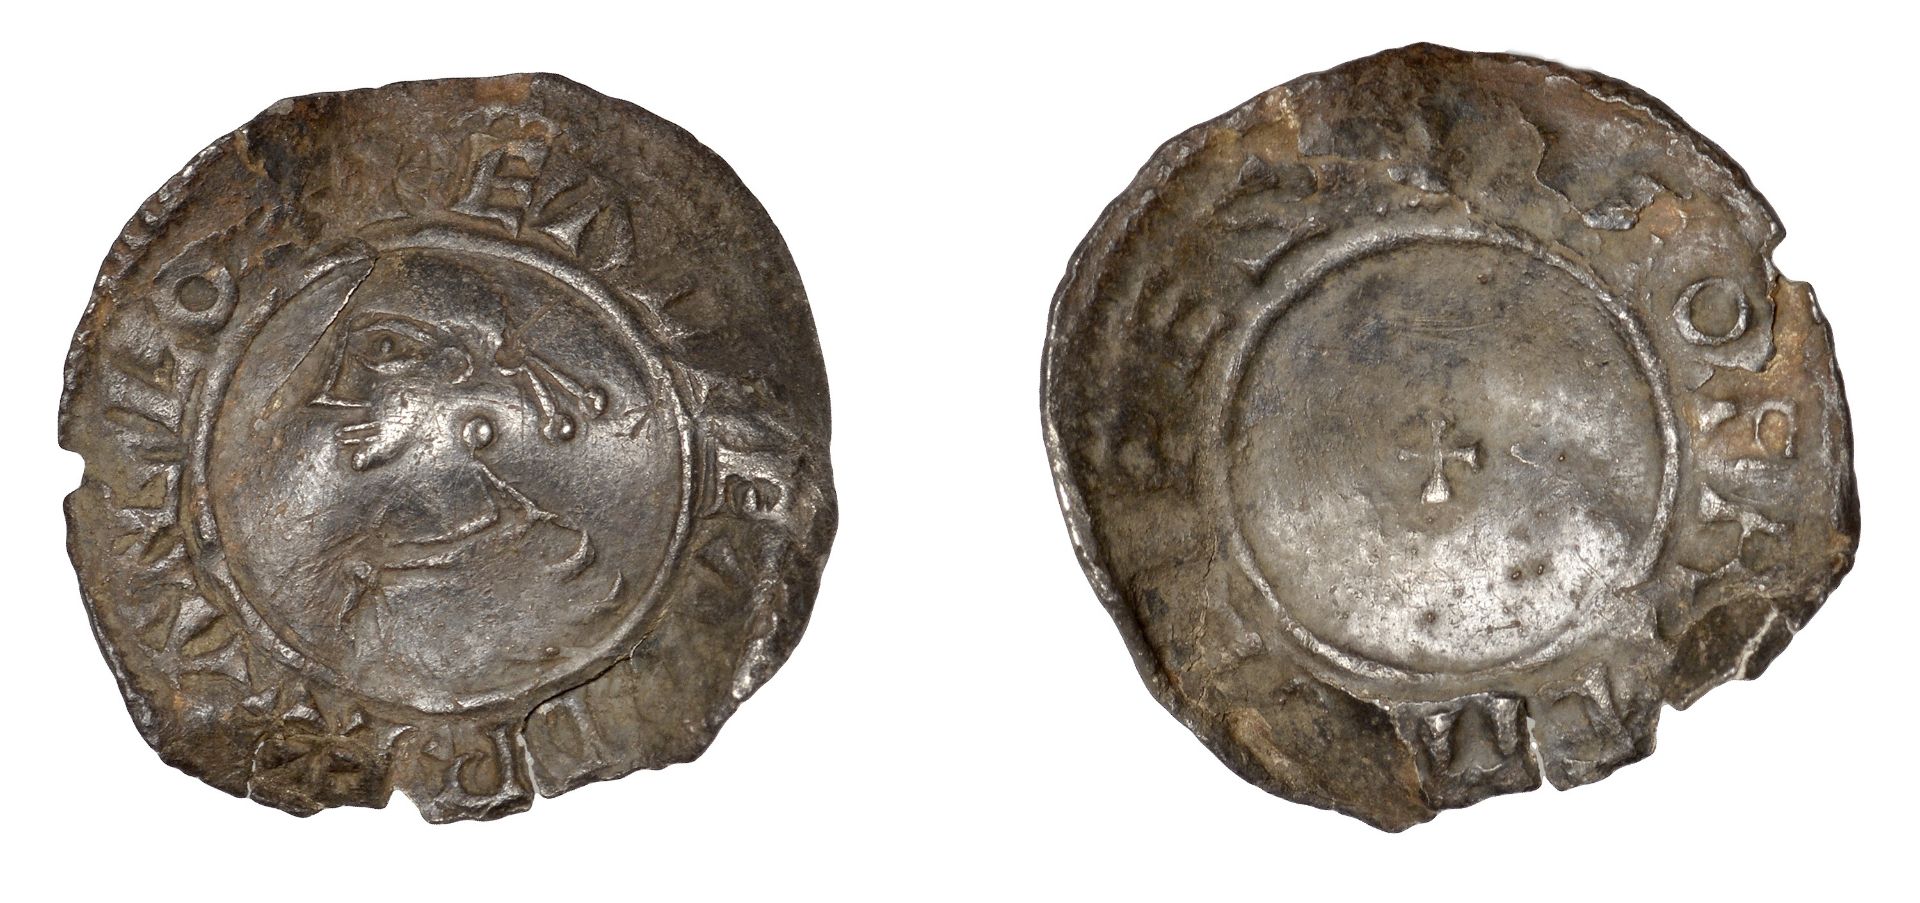 Edward the Martyr (975-978), Penny, sole type, Ipswich, Leofric, leofric mo gipes, 1.29g/12h...